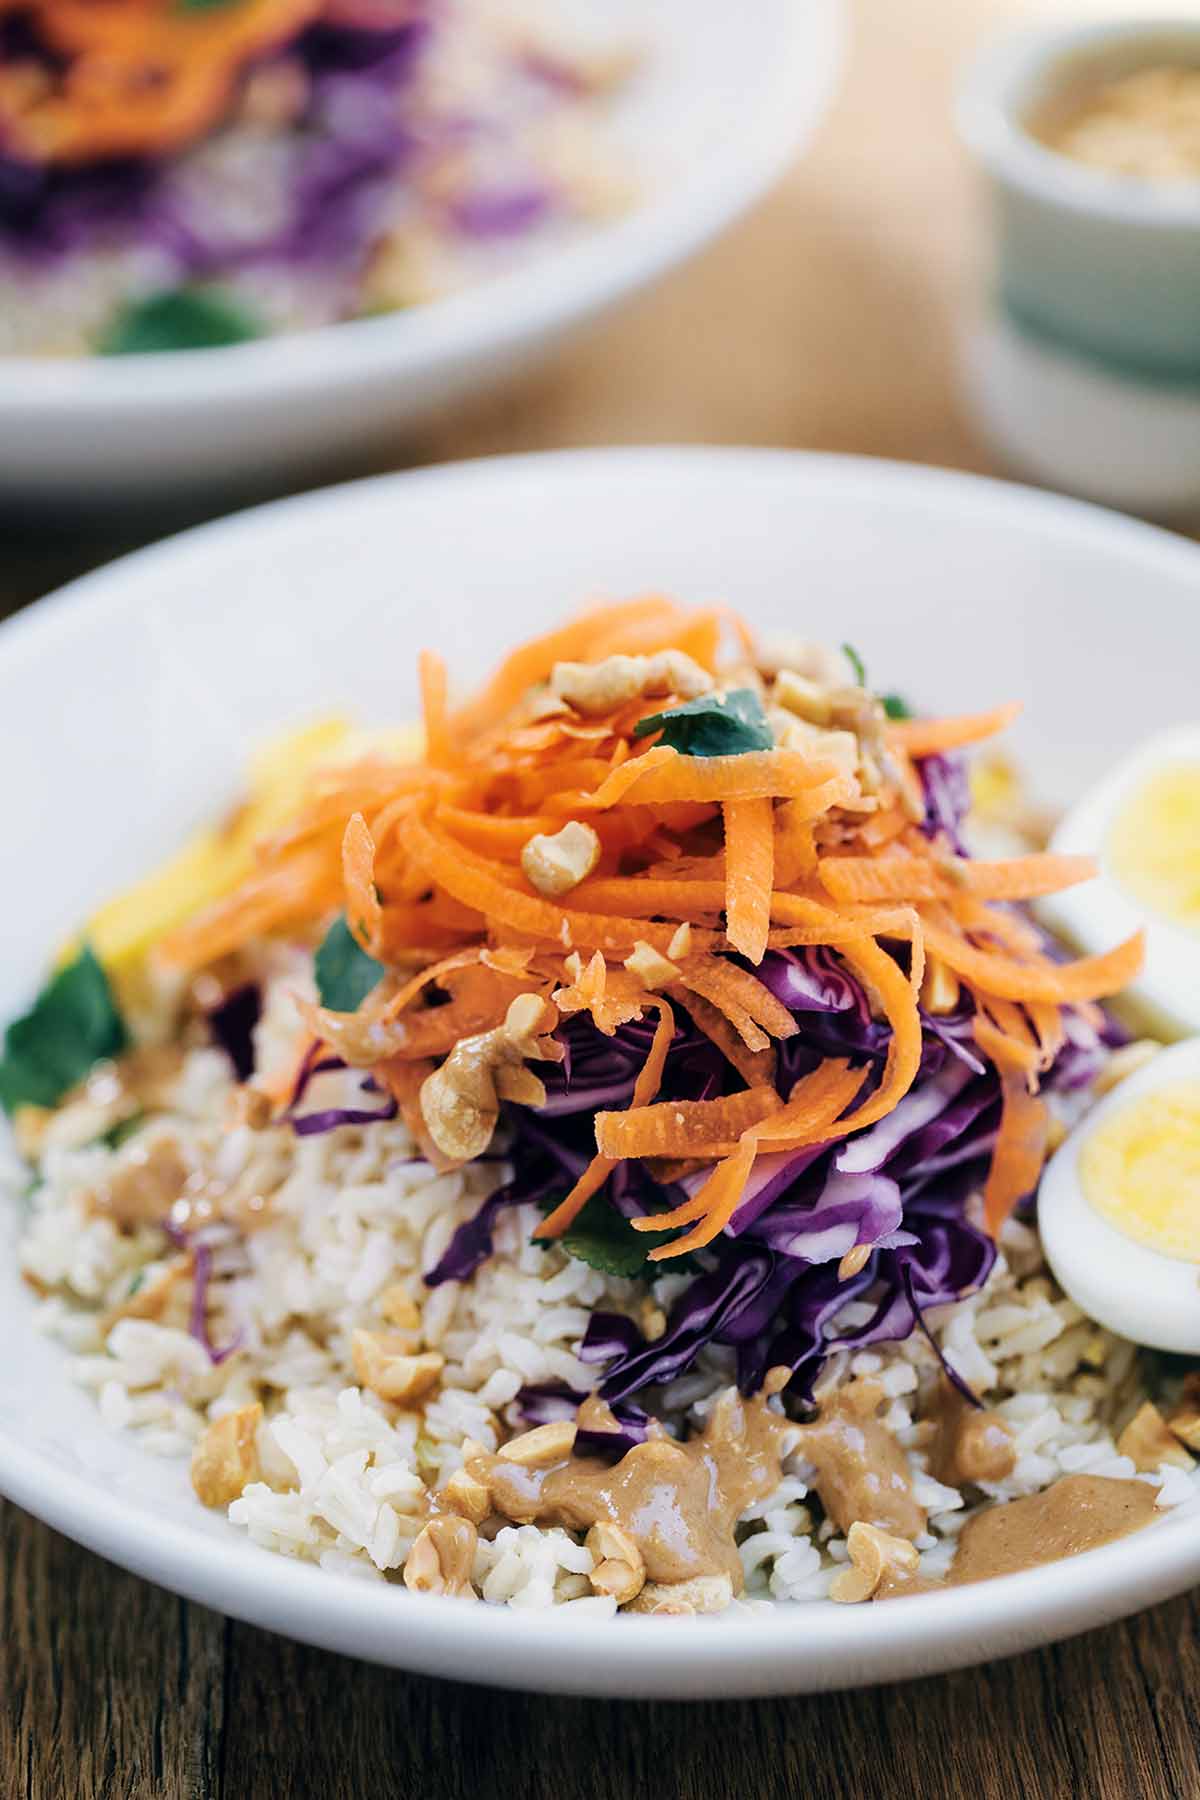 A bowl filled with gado gado salad withrice, peanuts, carrots, cabbage, and eggs.